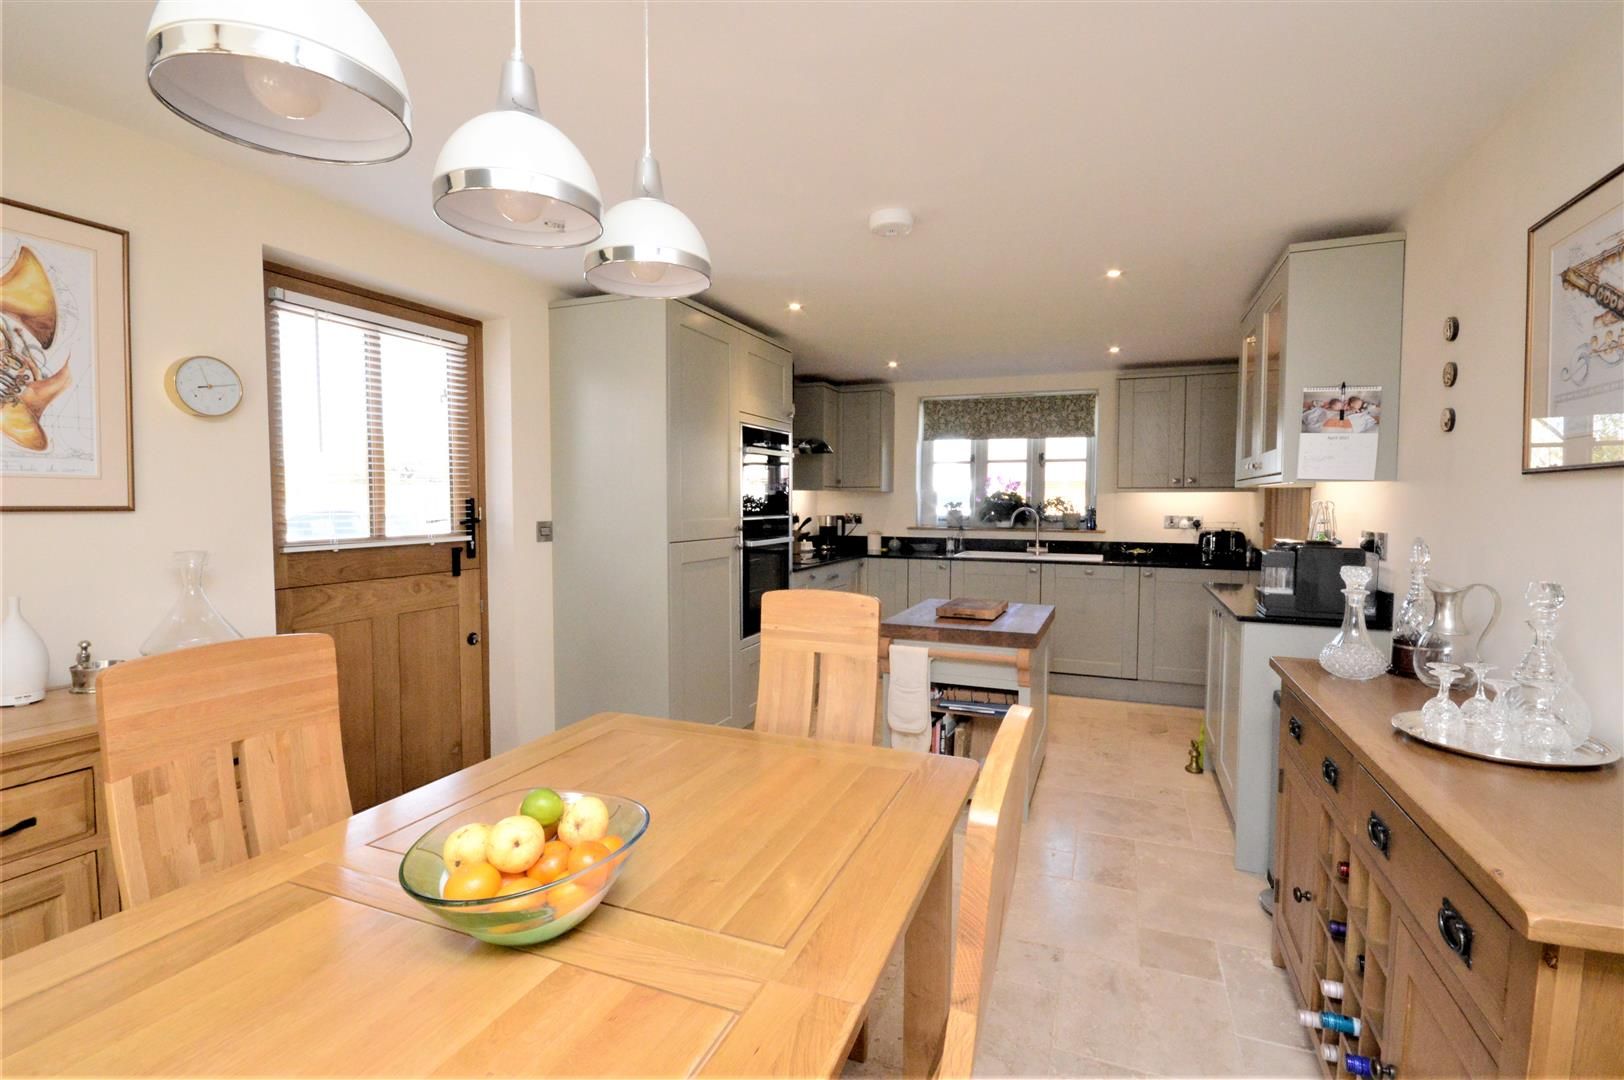 3 bed detached for sale in Winforton  - Property Image 5